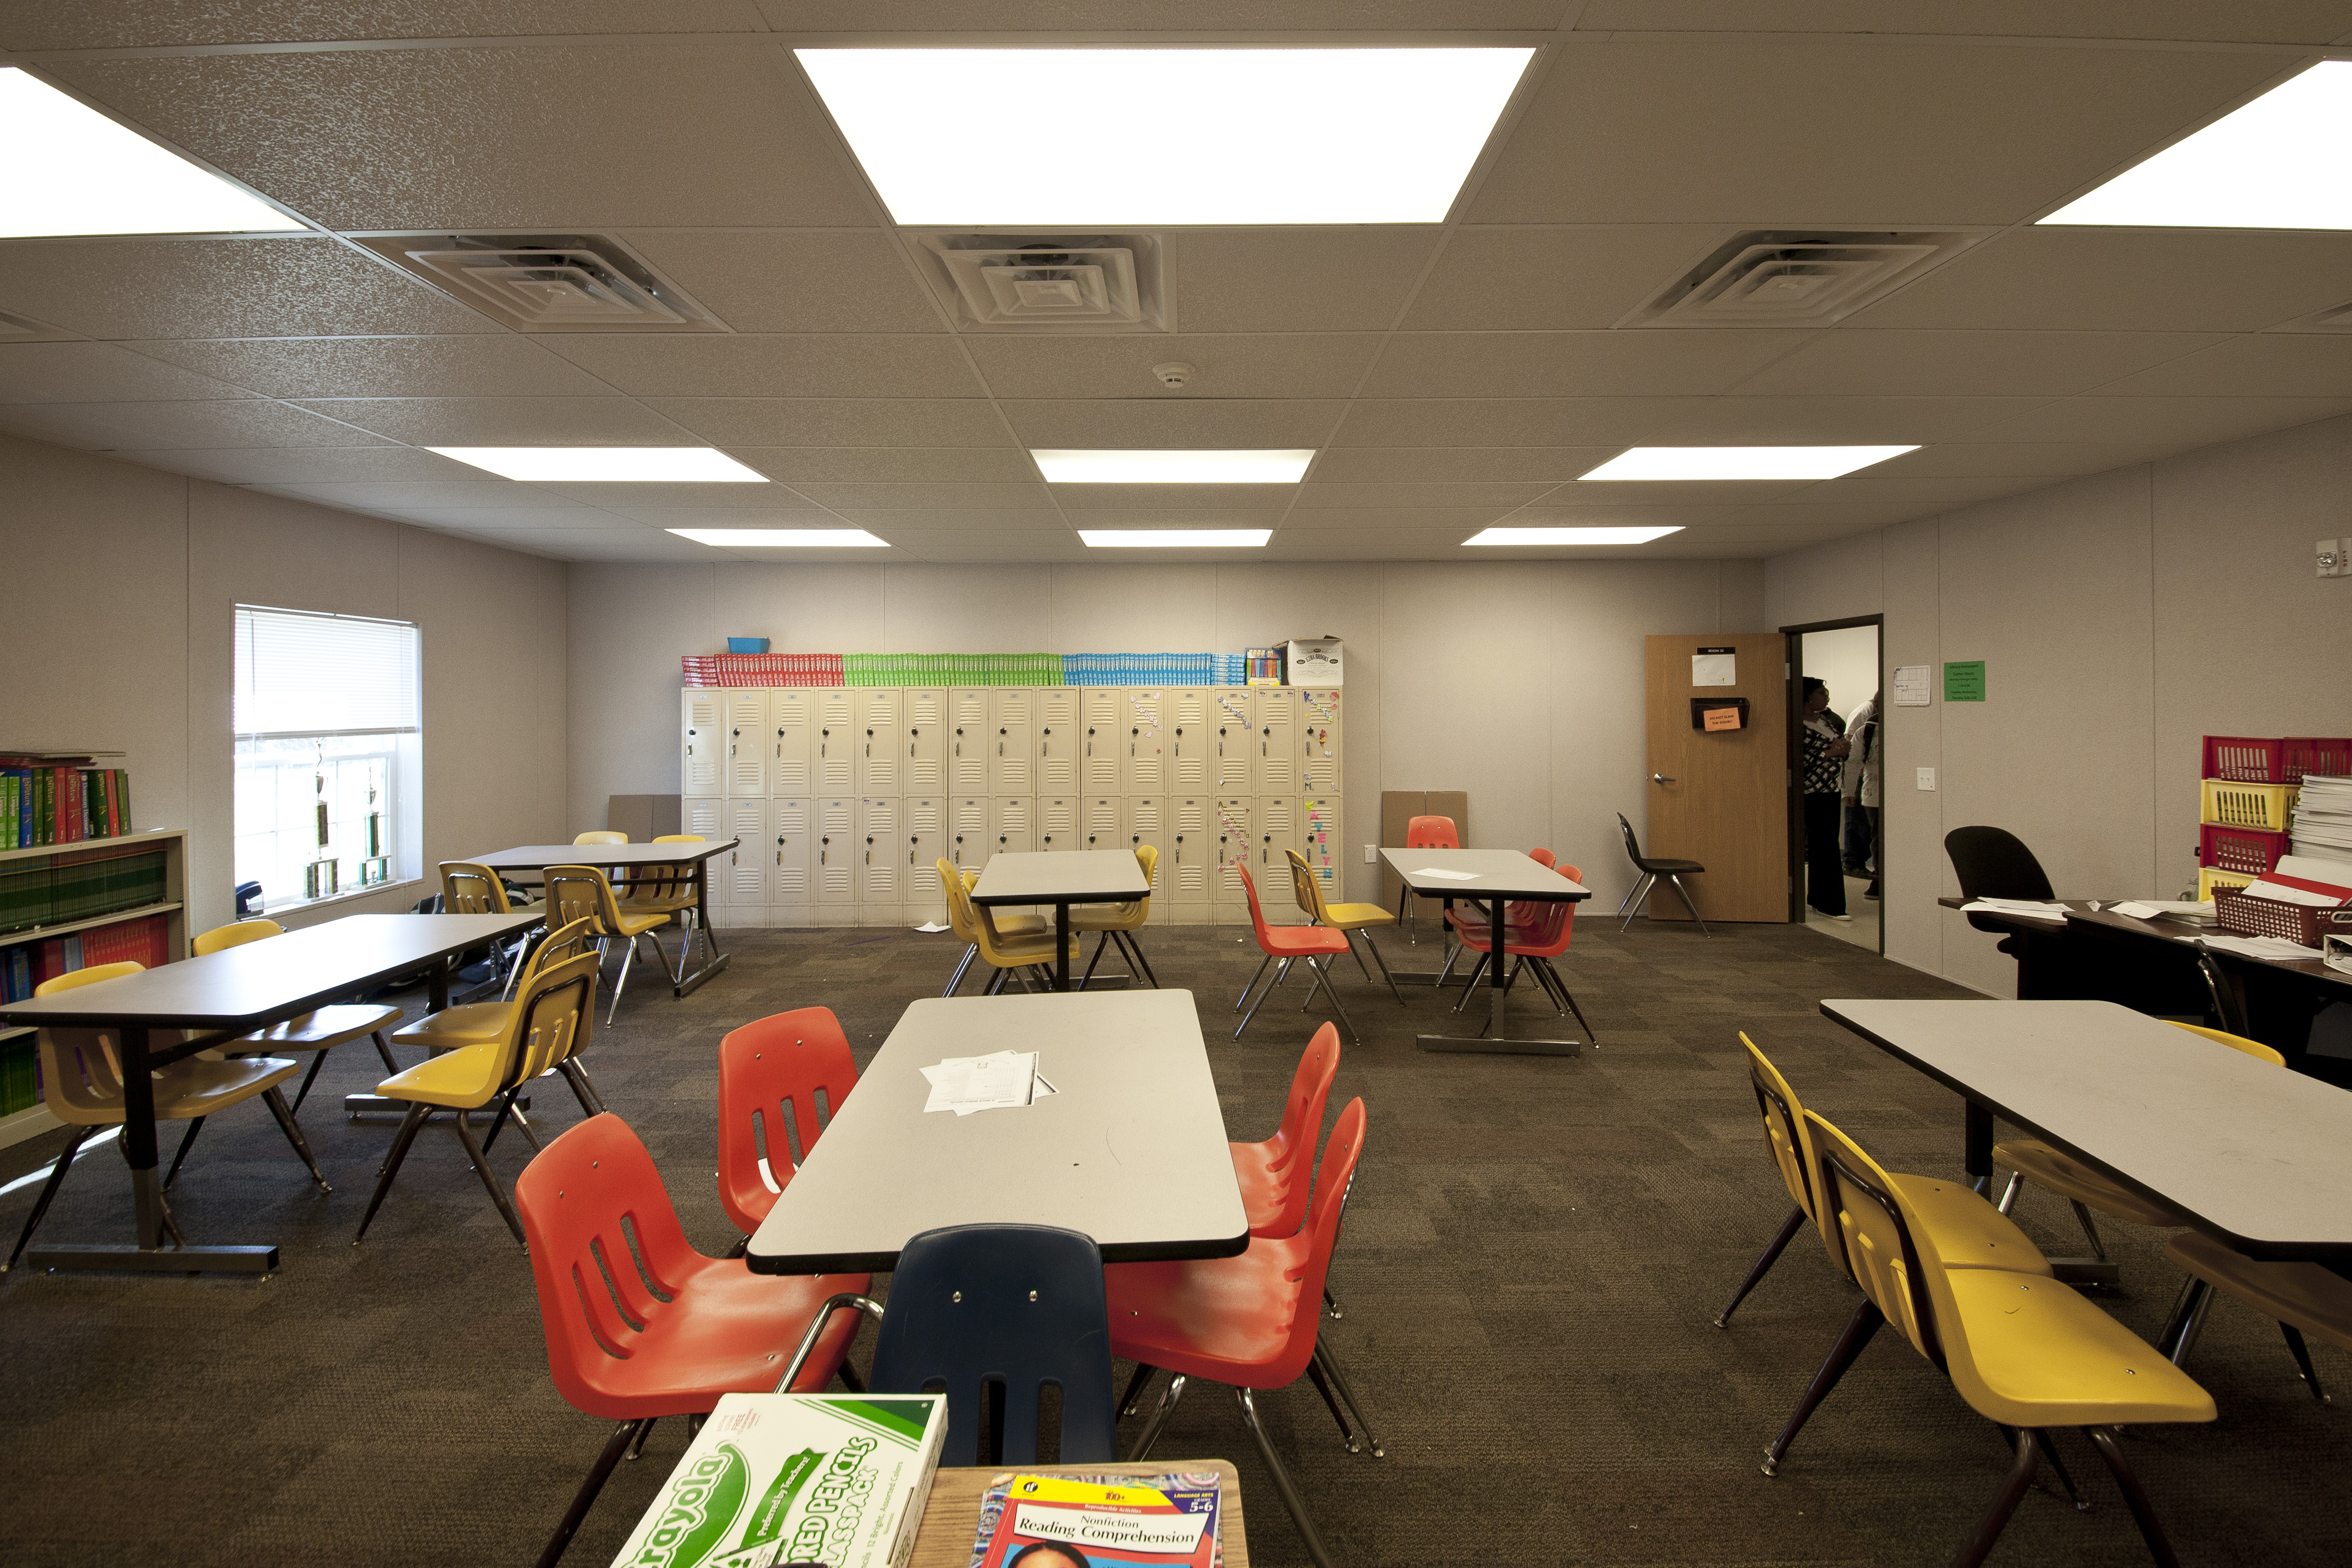 Choosing Modular Classrooms for Private School Buildings